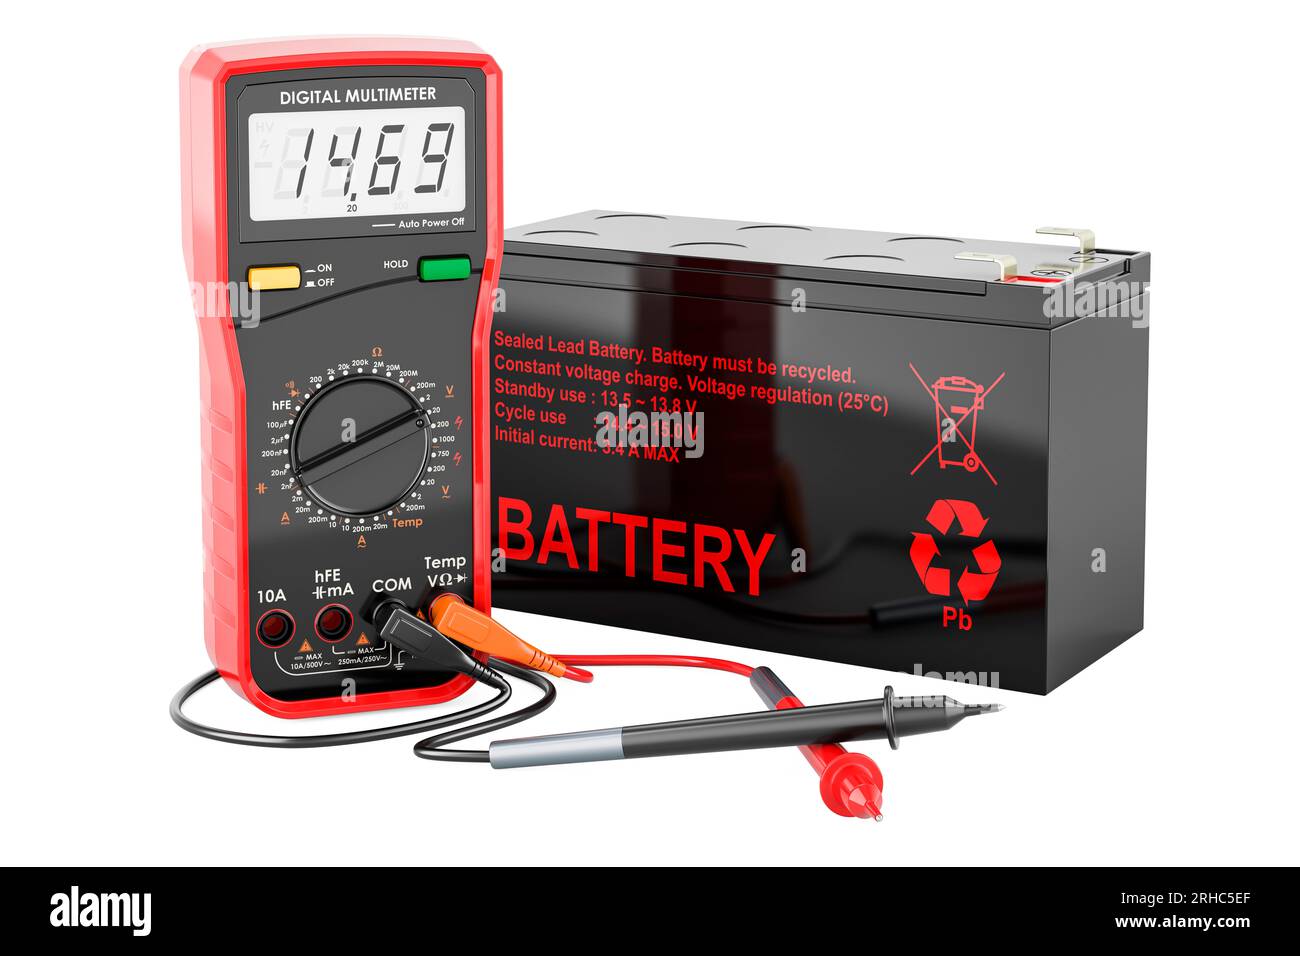 Digital multimeter and sealed UPS battery, 3D rendering isolated on white background Stock Photo